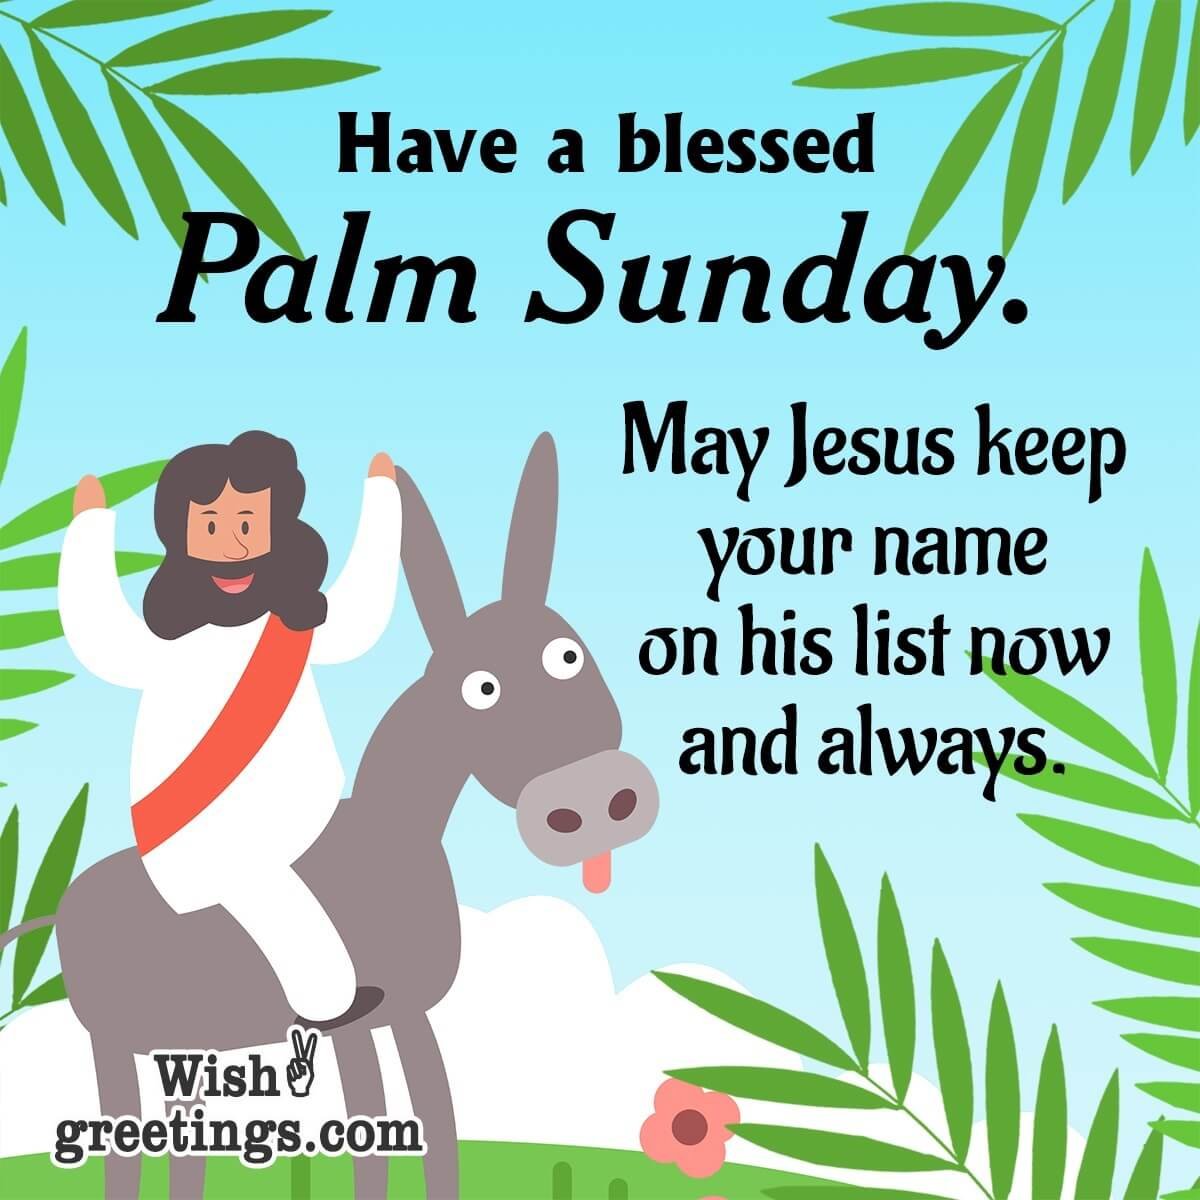 Palm Sunday Wishes Blessings Wish Greetings